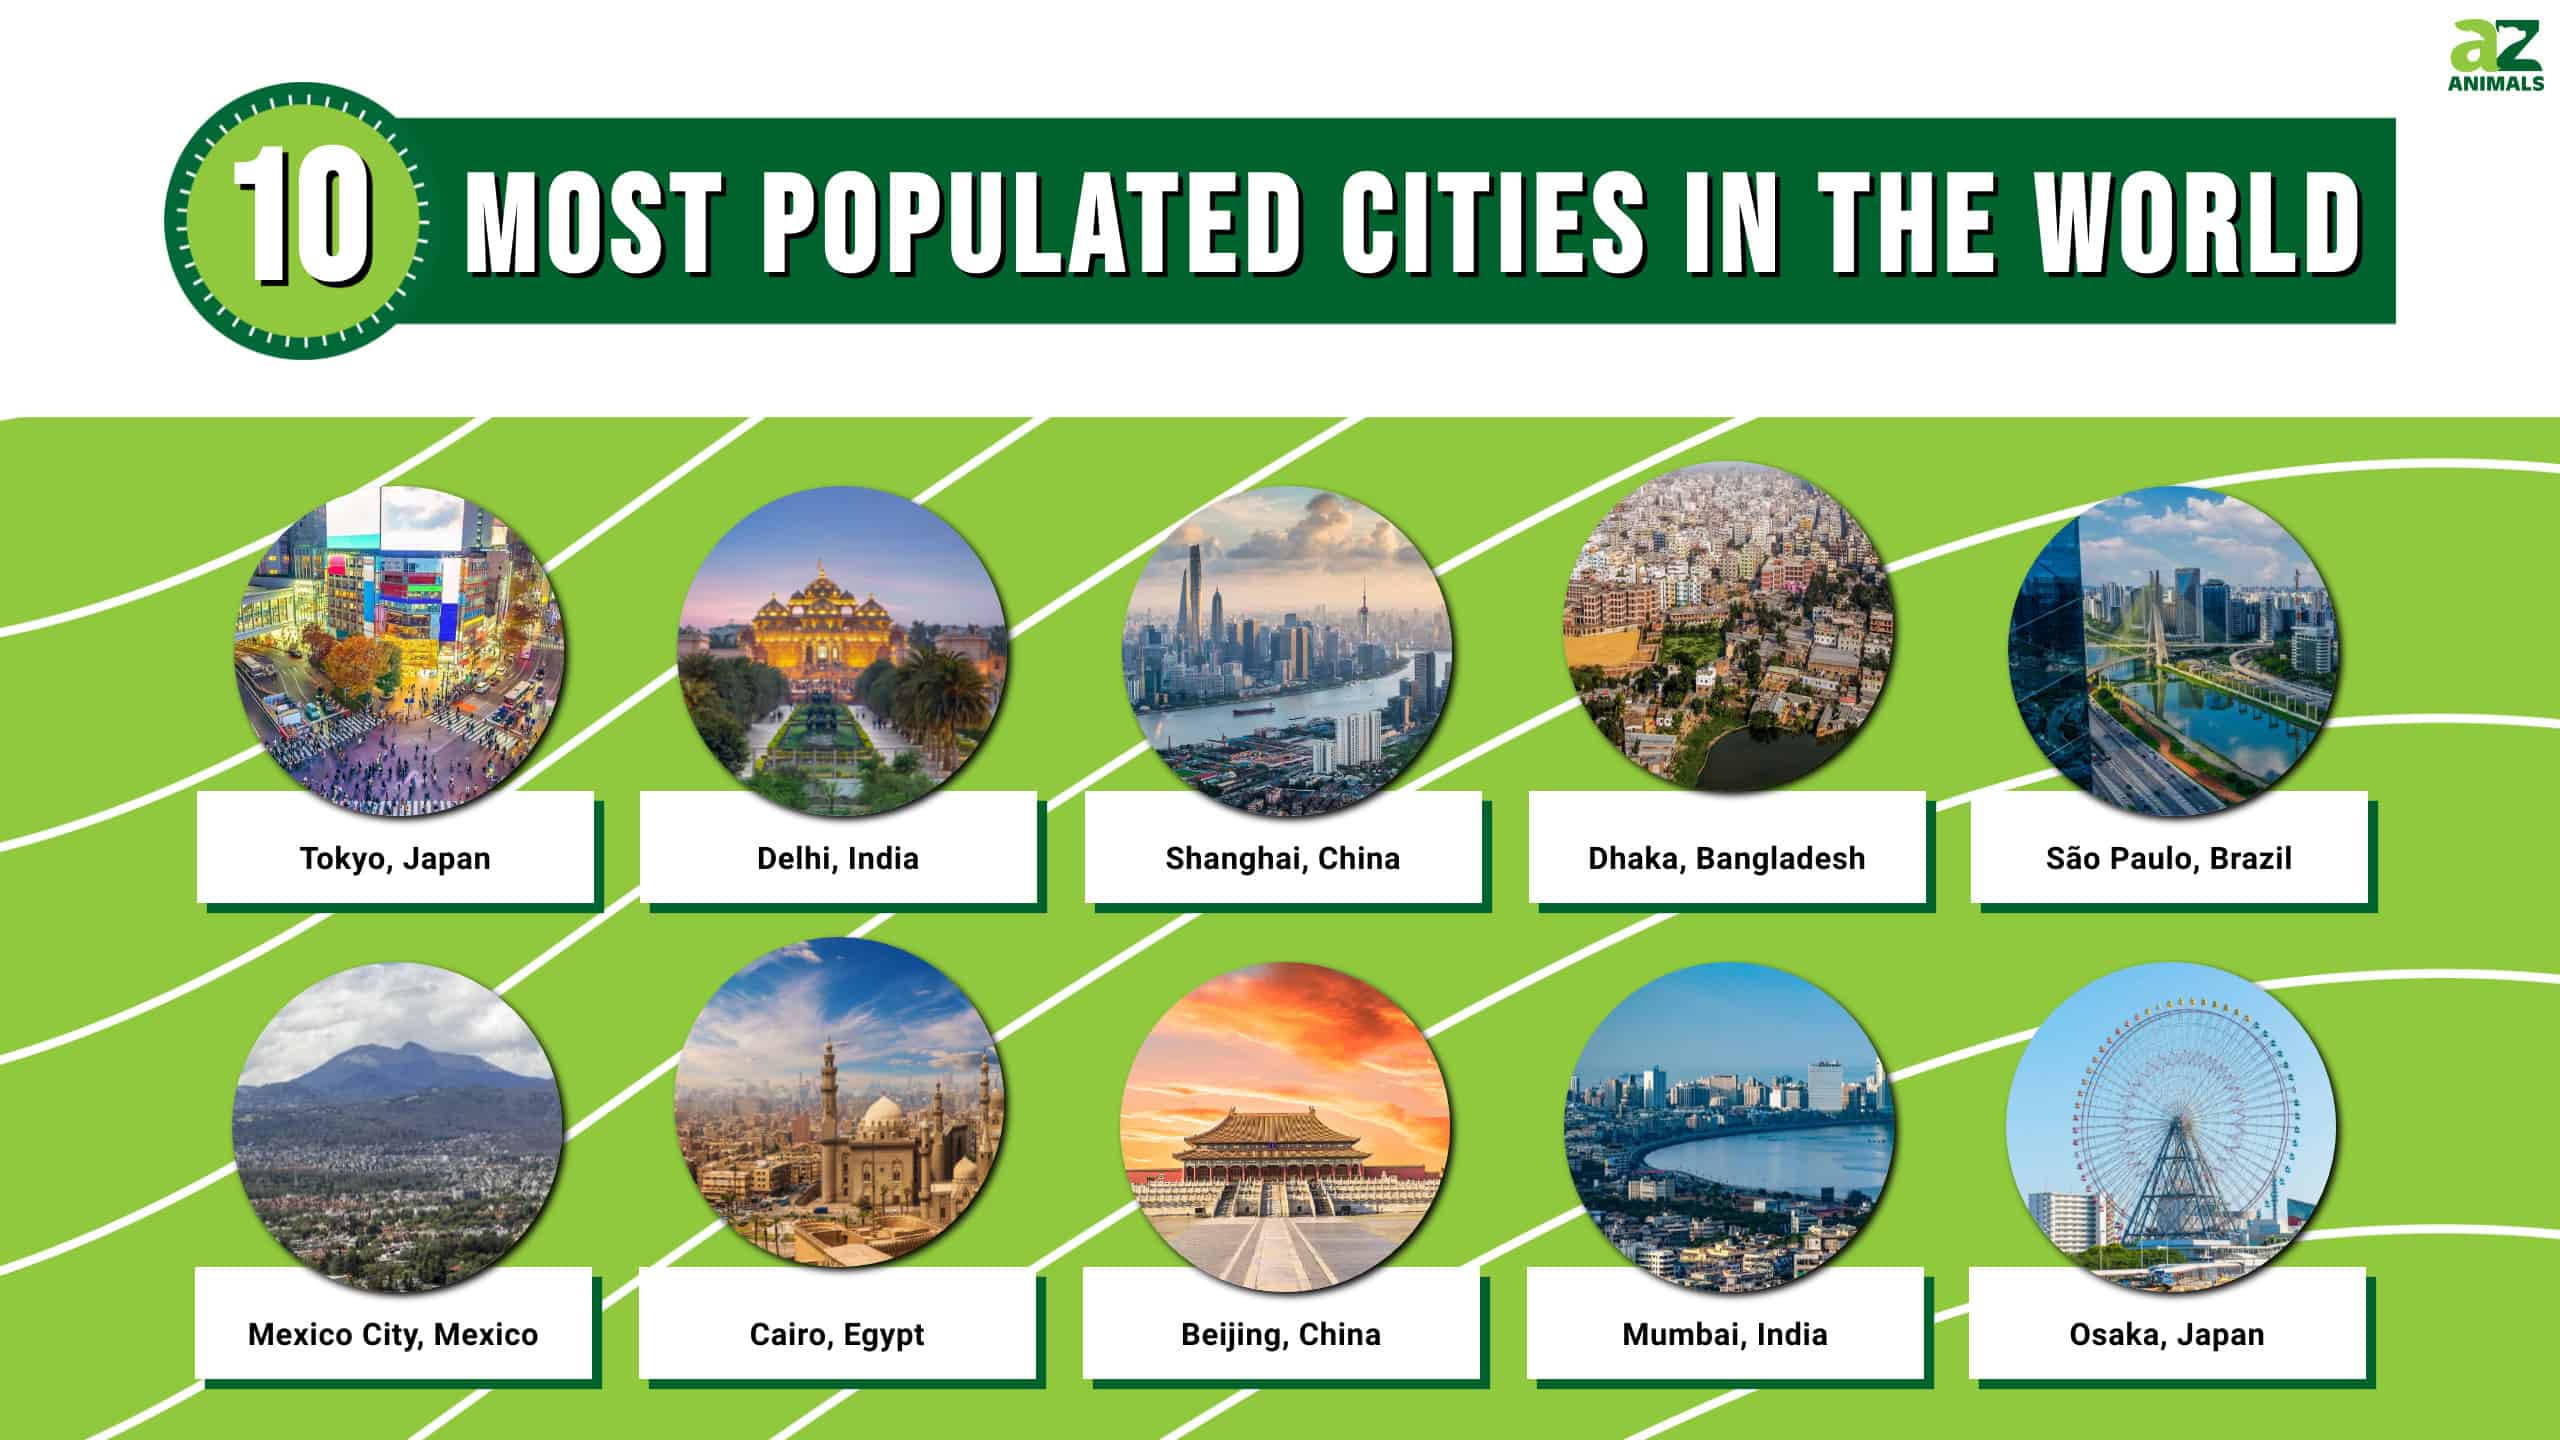 Most Populated Cities in the World infographic